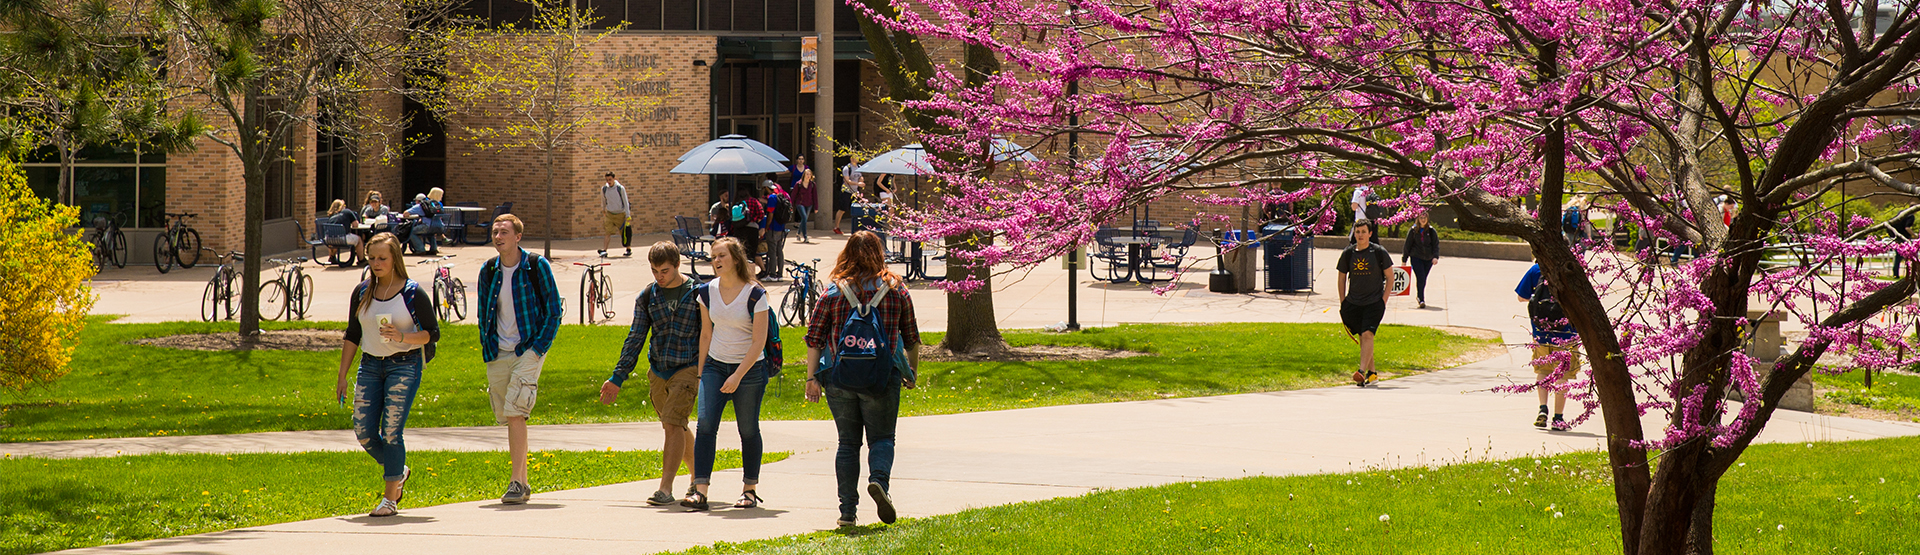 Spring campus students walking outside of Markee Pioneer Student Center